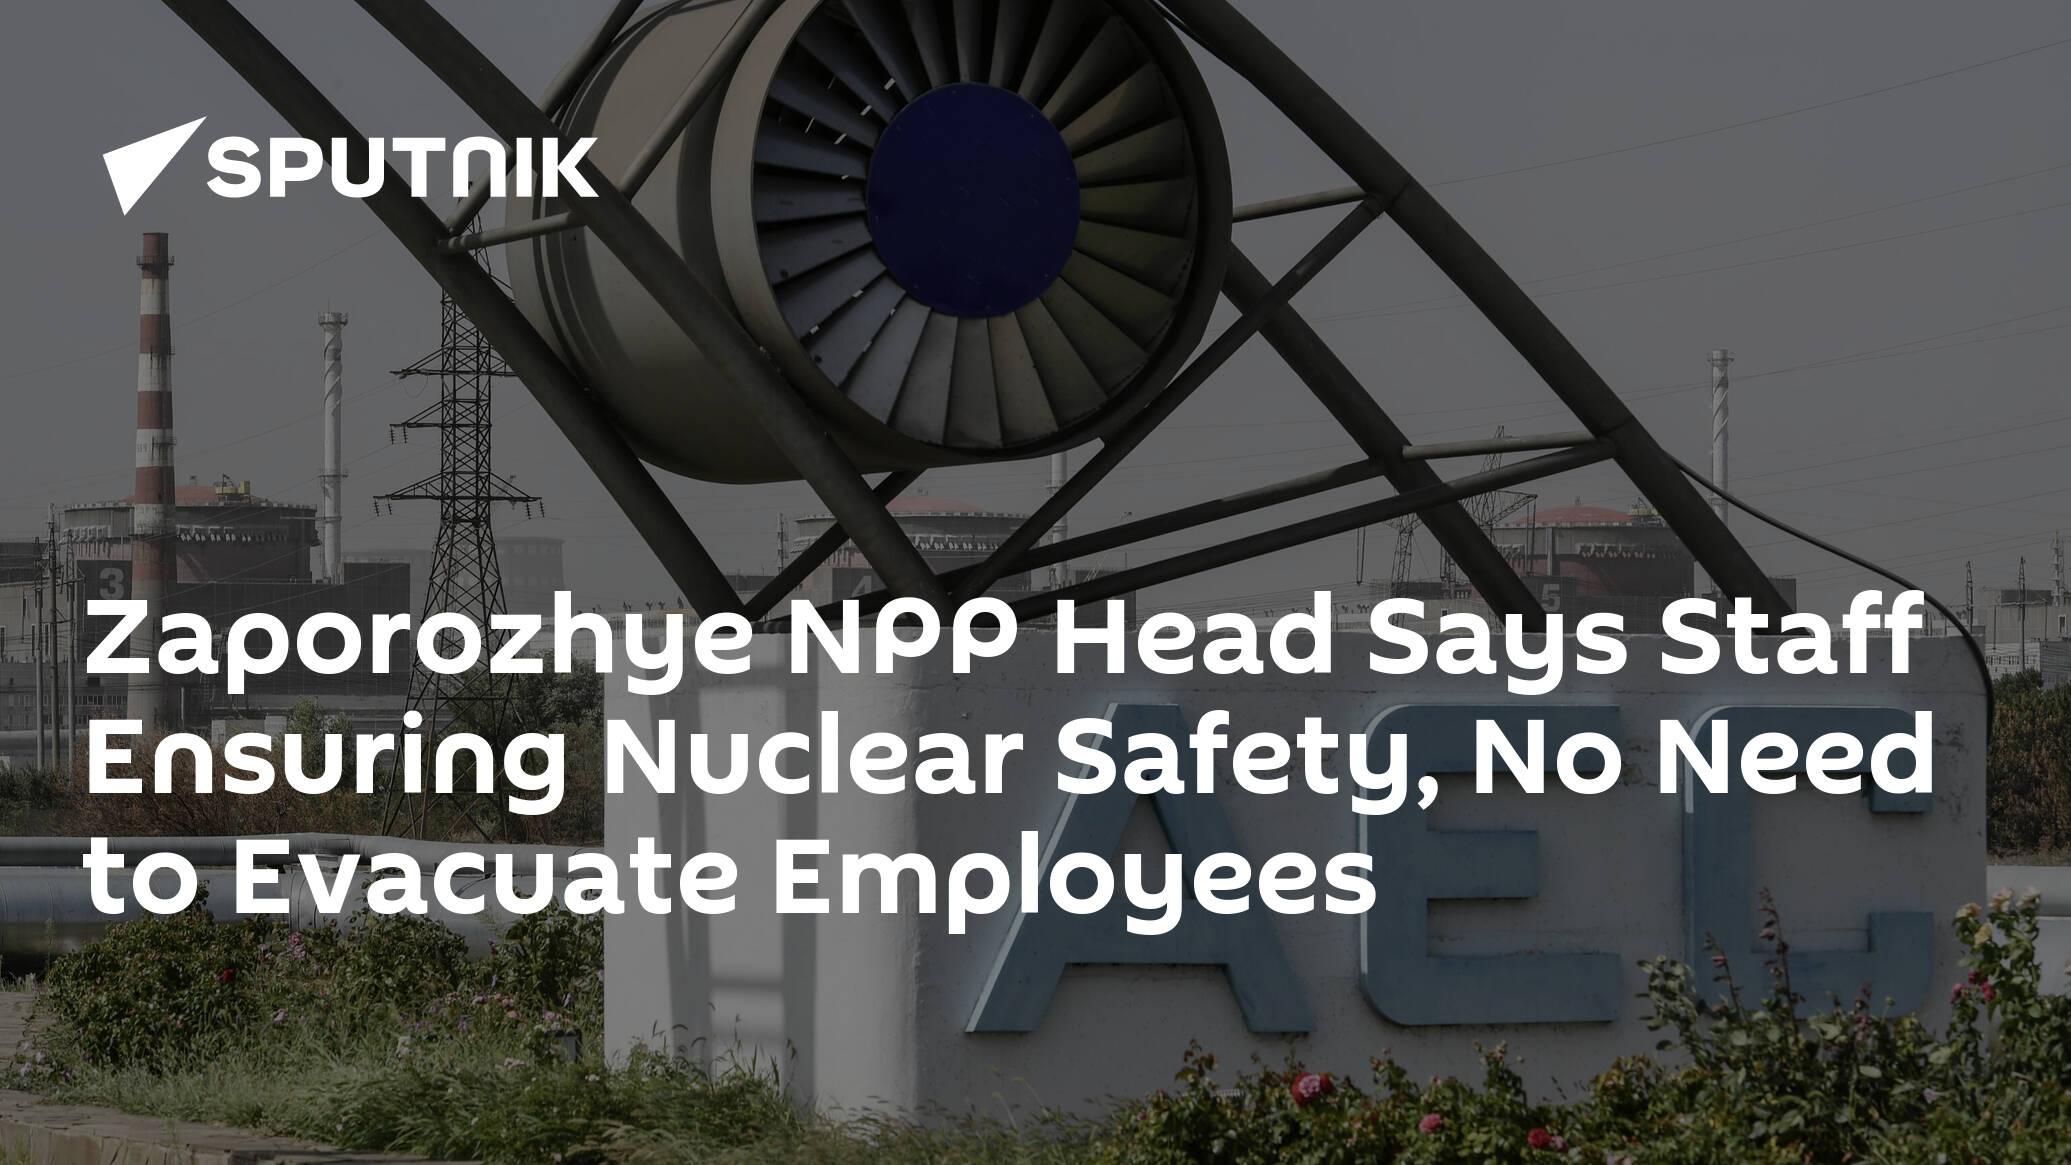 Zaporozhye NPP Head Says Staff Ensuring Nuclear Safety, No Need to Evacuate Employees